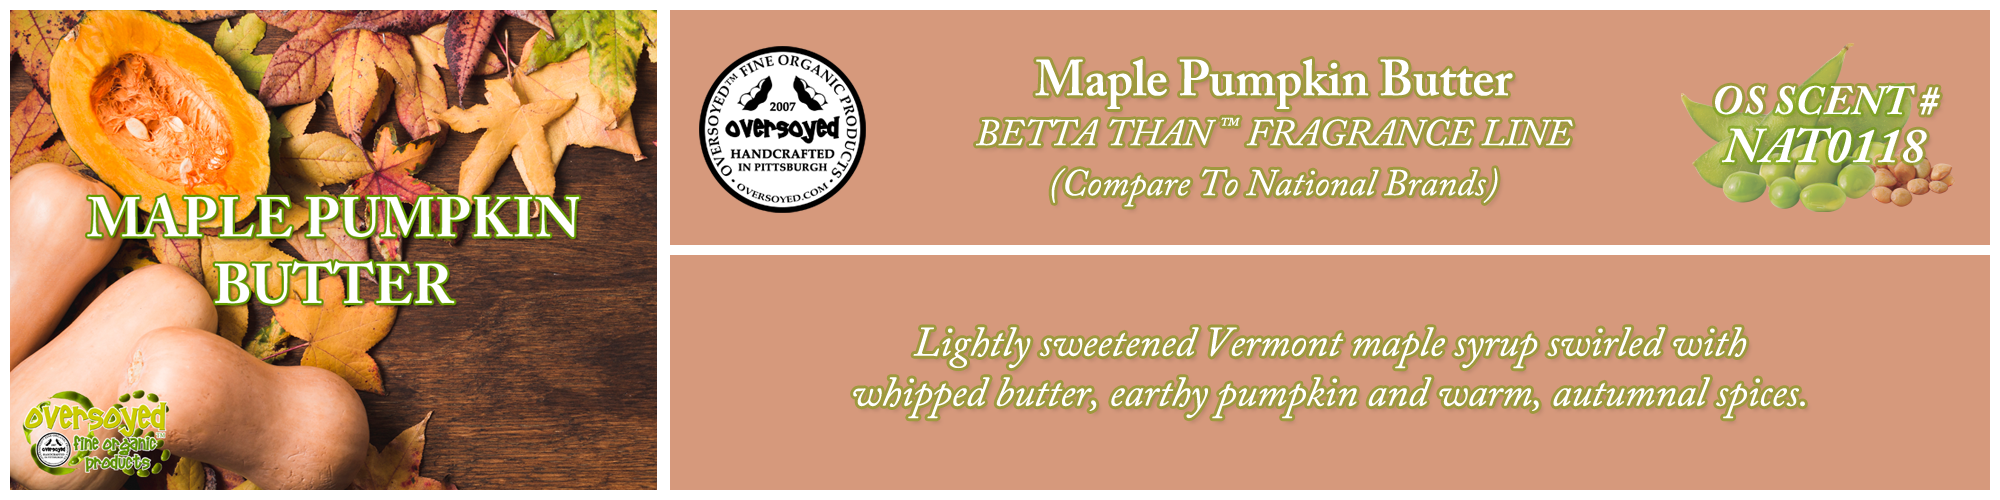 Maple Pumpkin Butter Handcrafted Products Collection